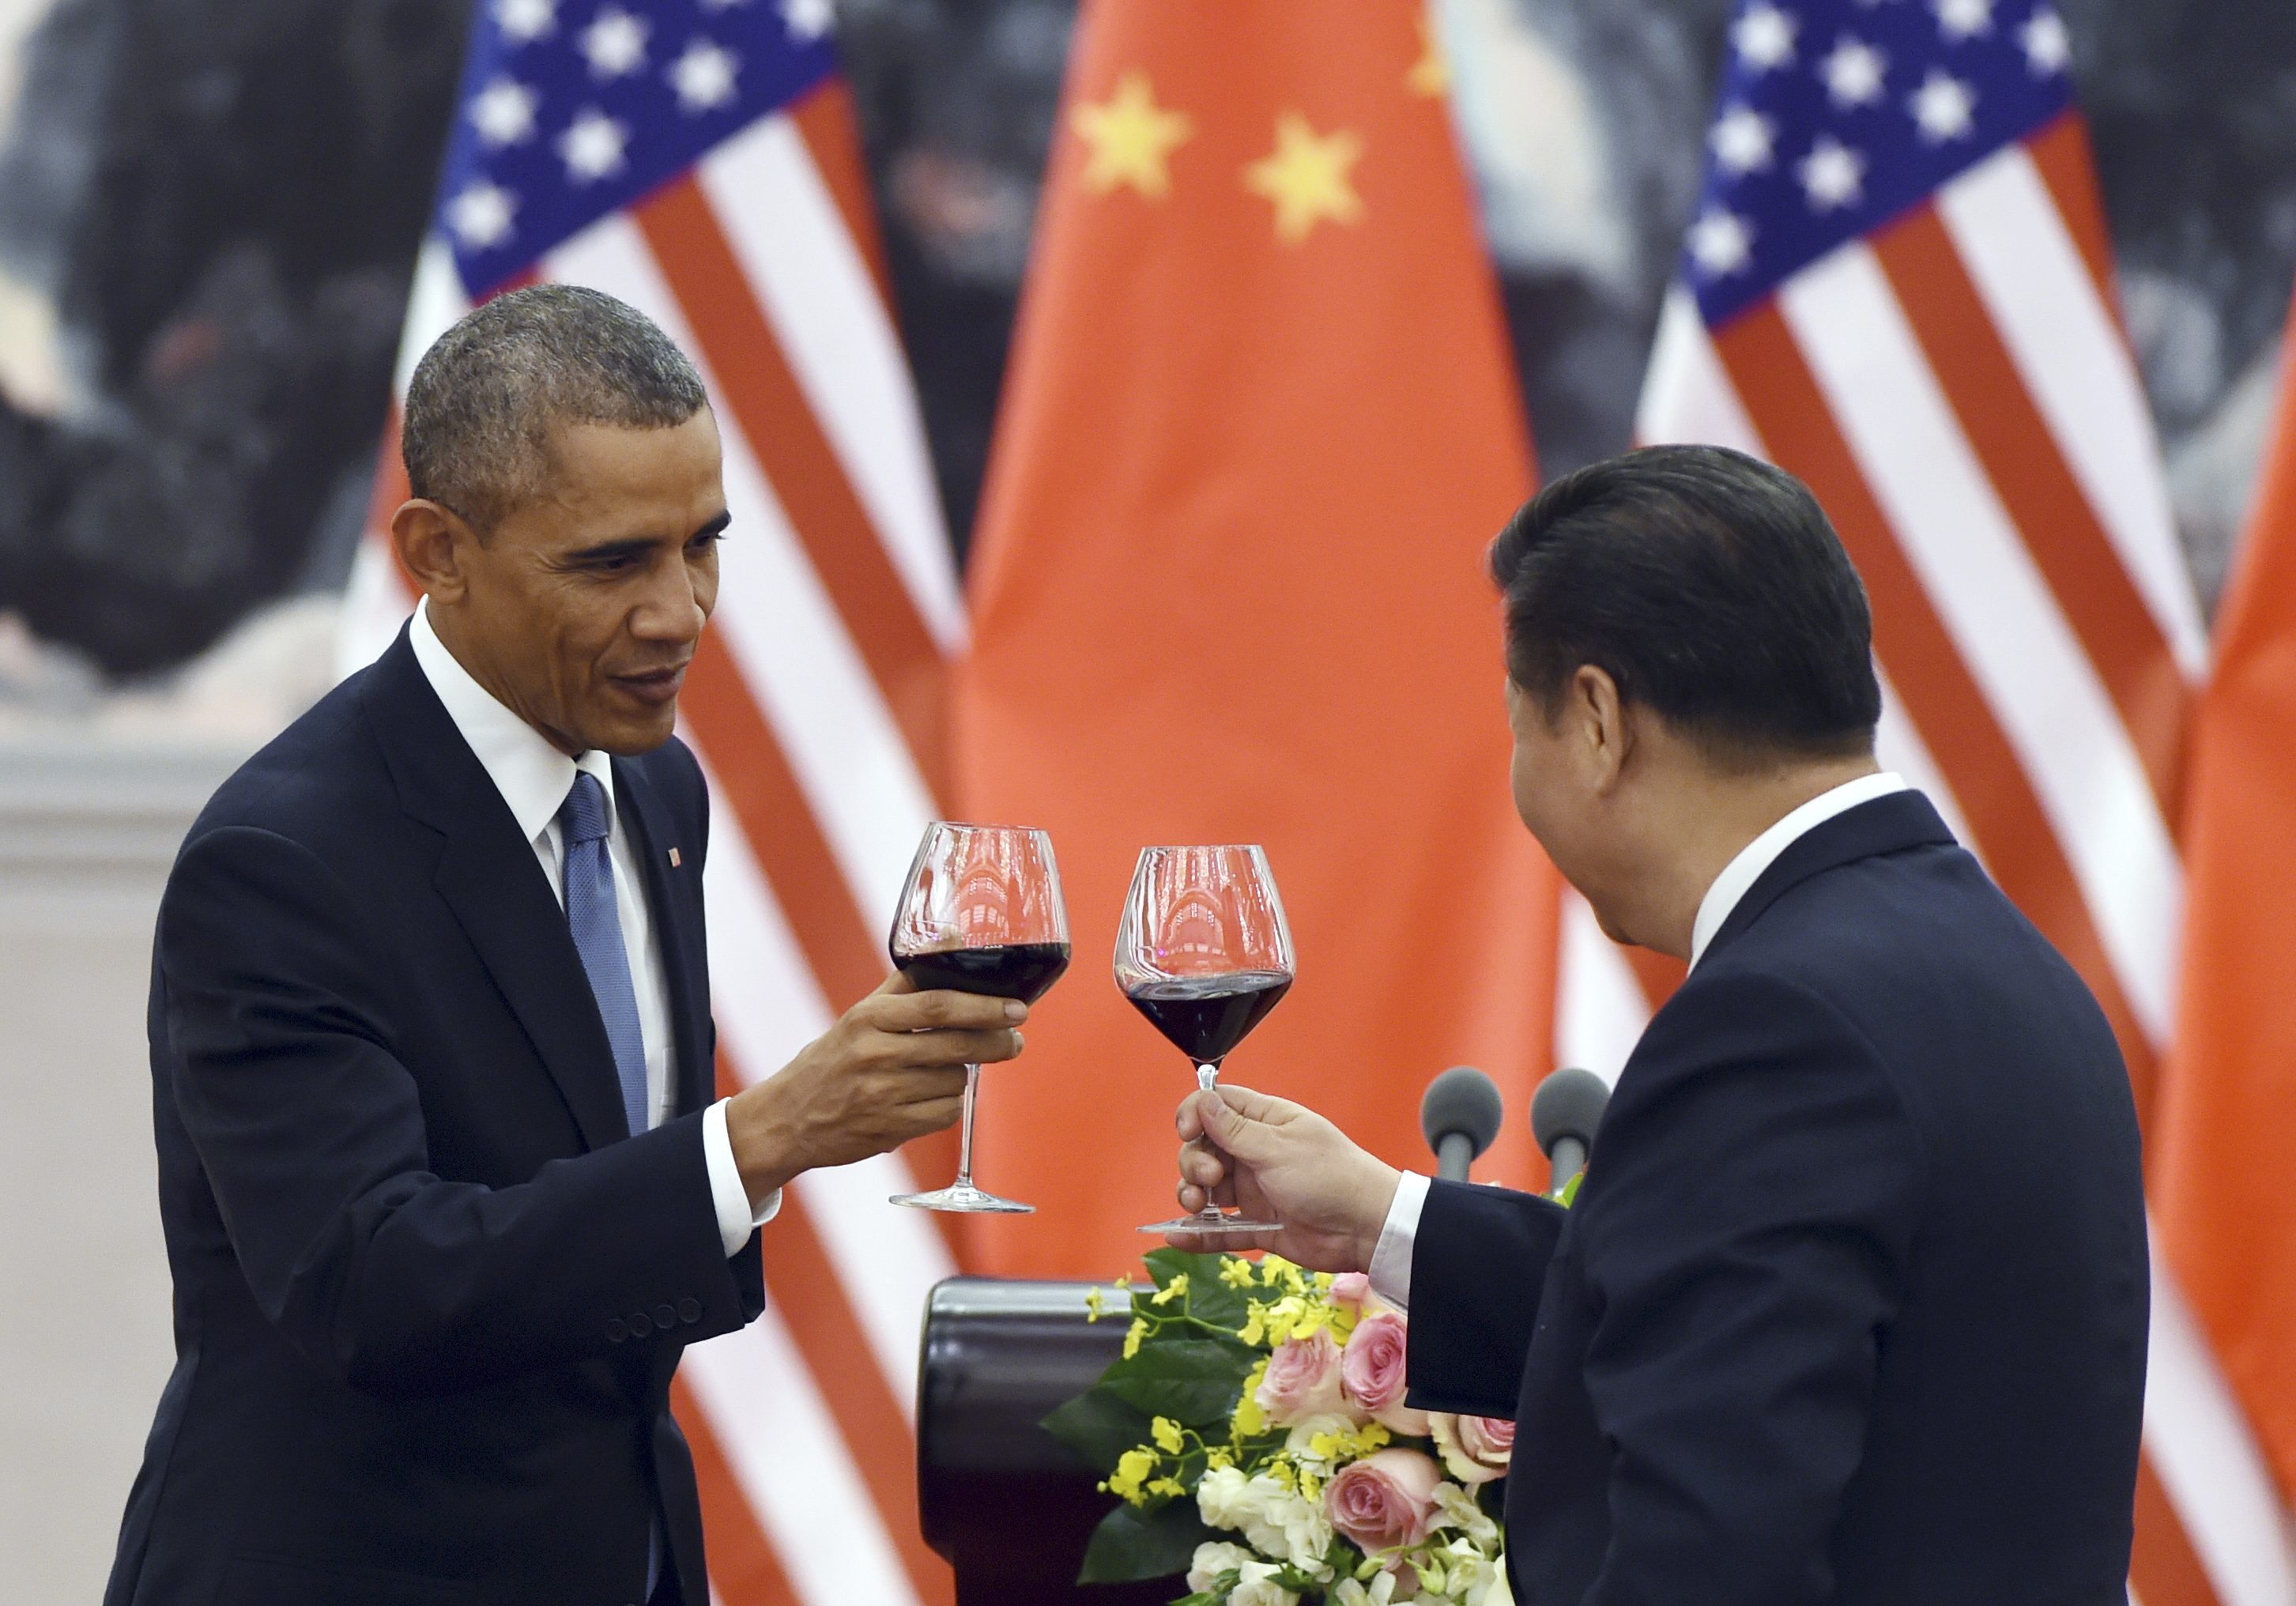 U.S. President Barack Obama, left, toasts with Chinese President Xi Jinping at a lunch banquet in the Great Hall of the People in Beijing on Nov. 12, 2014 (Greg Baker—AP)